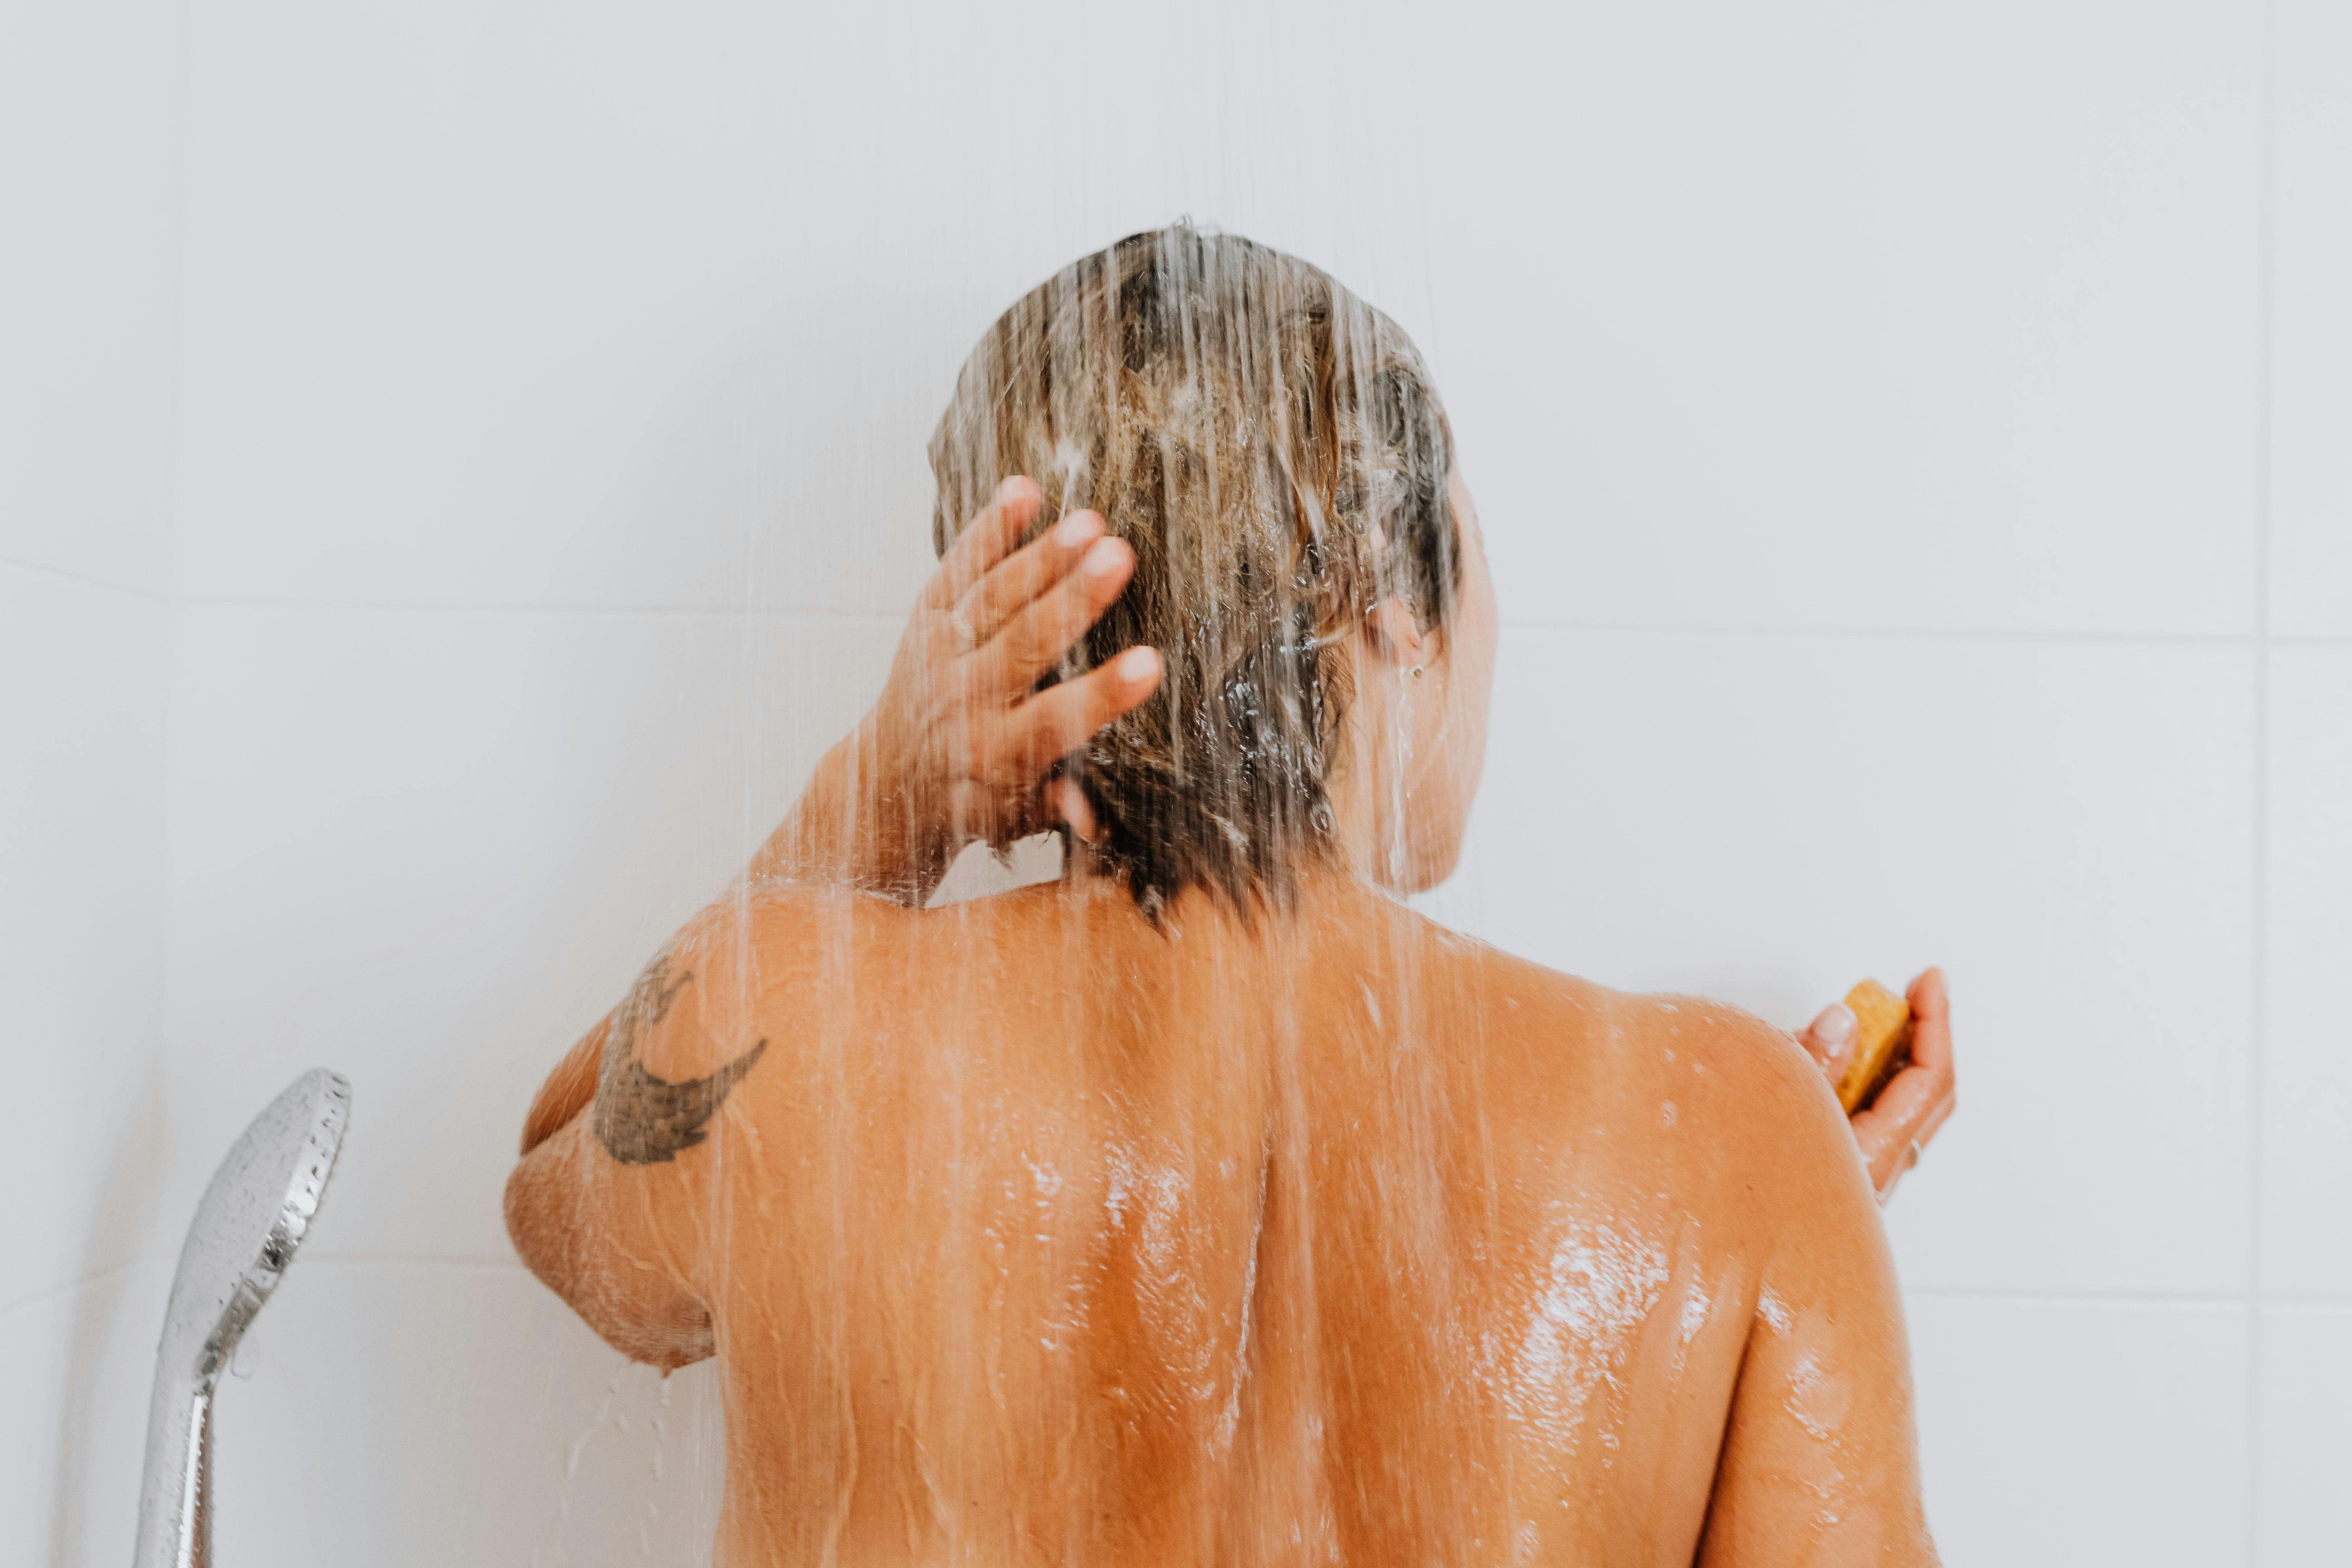 A woman taking a shower | Source: Pexels